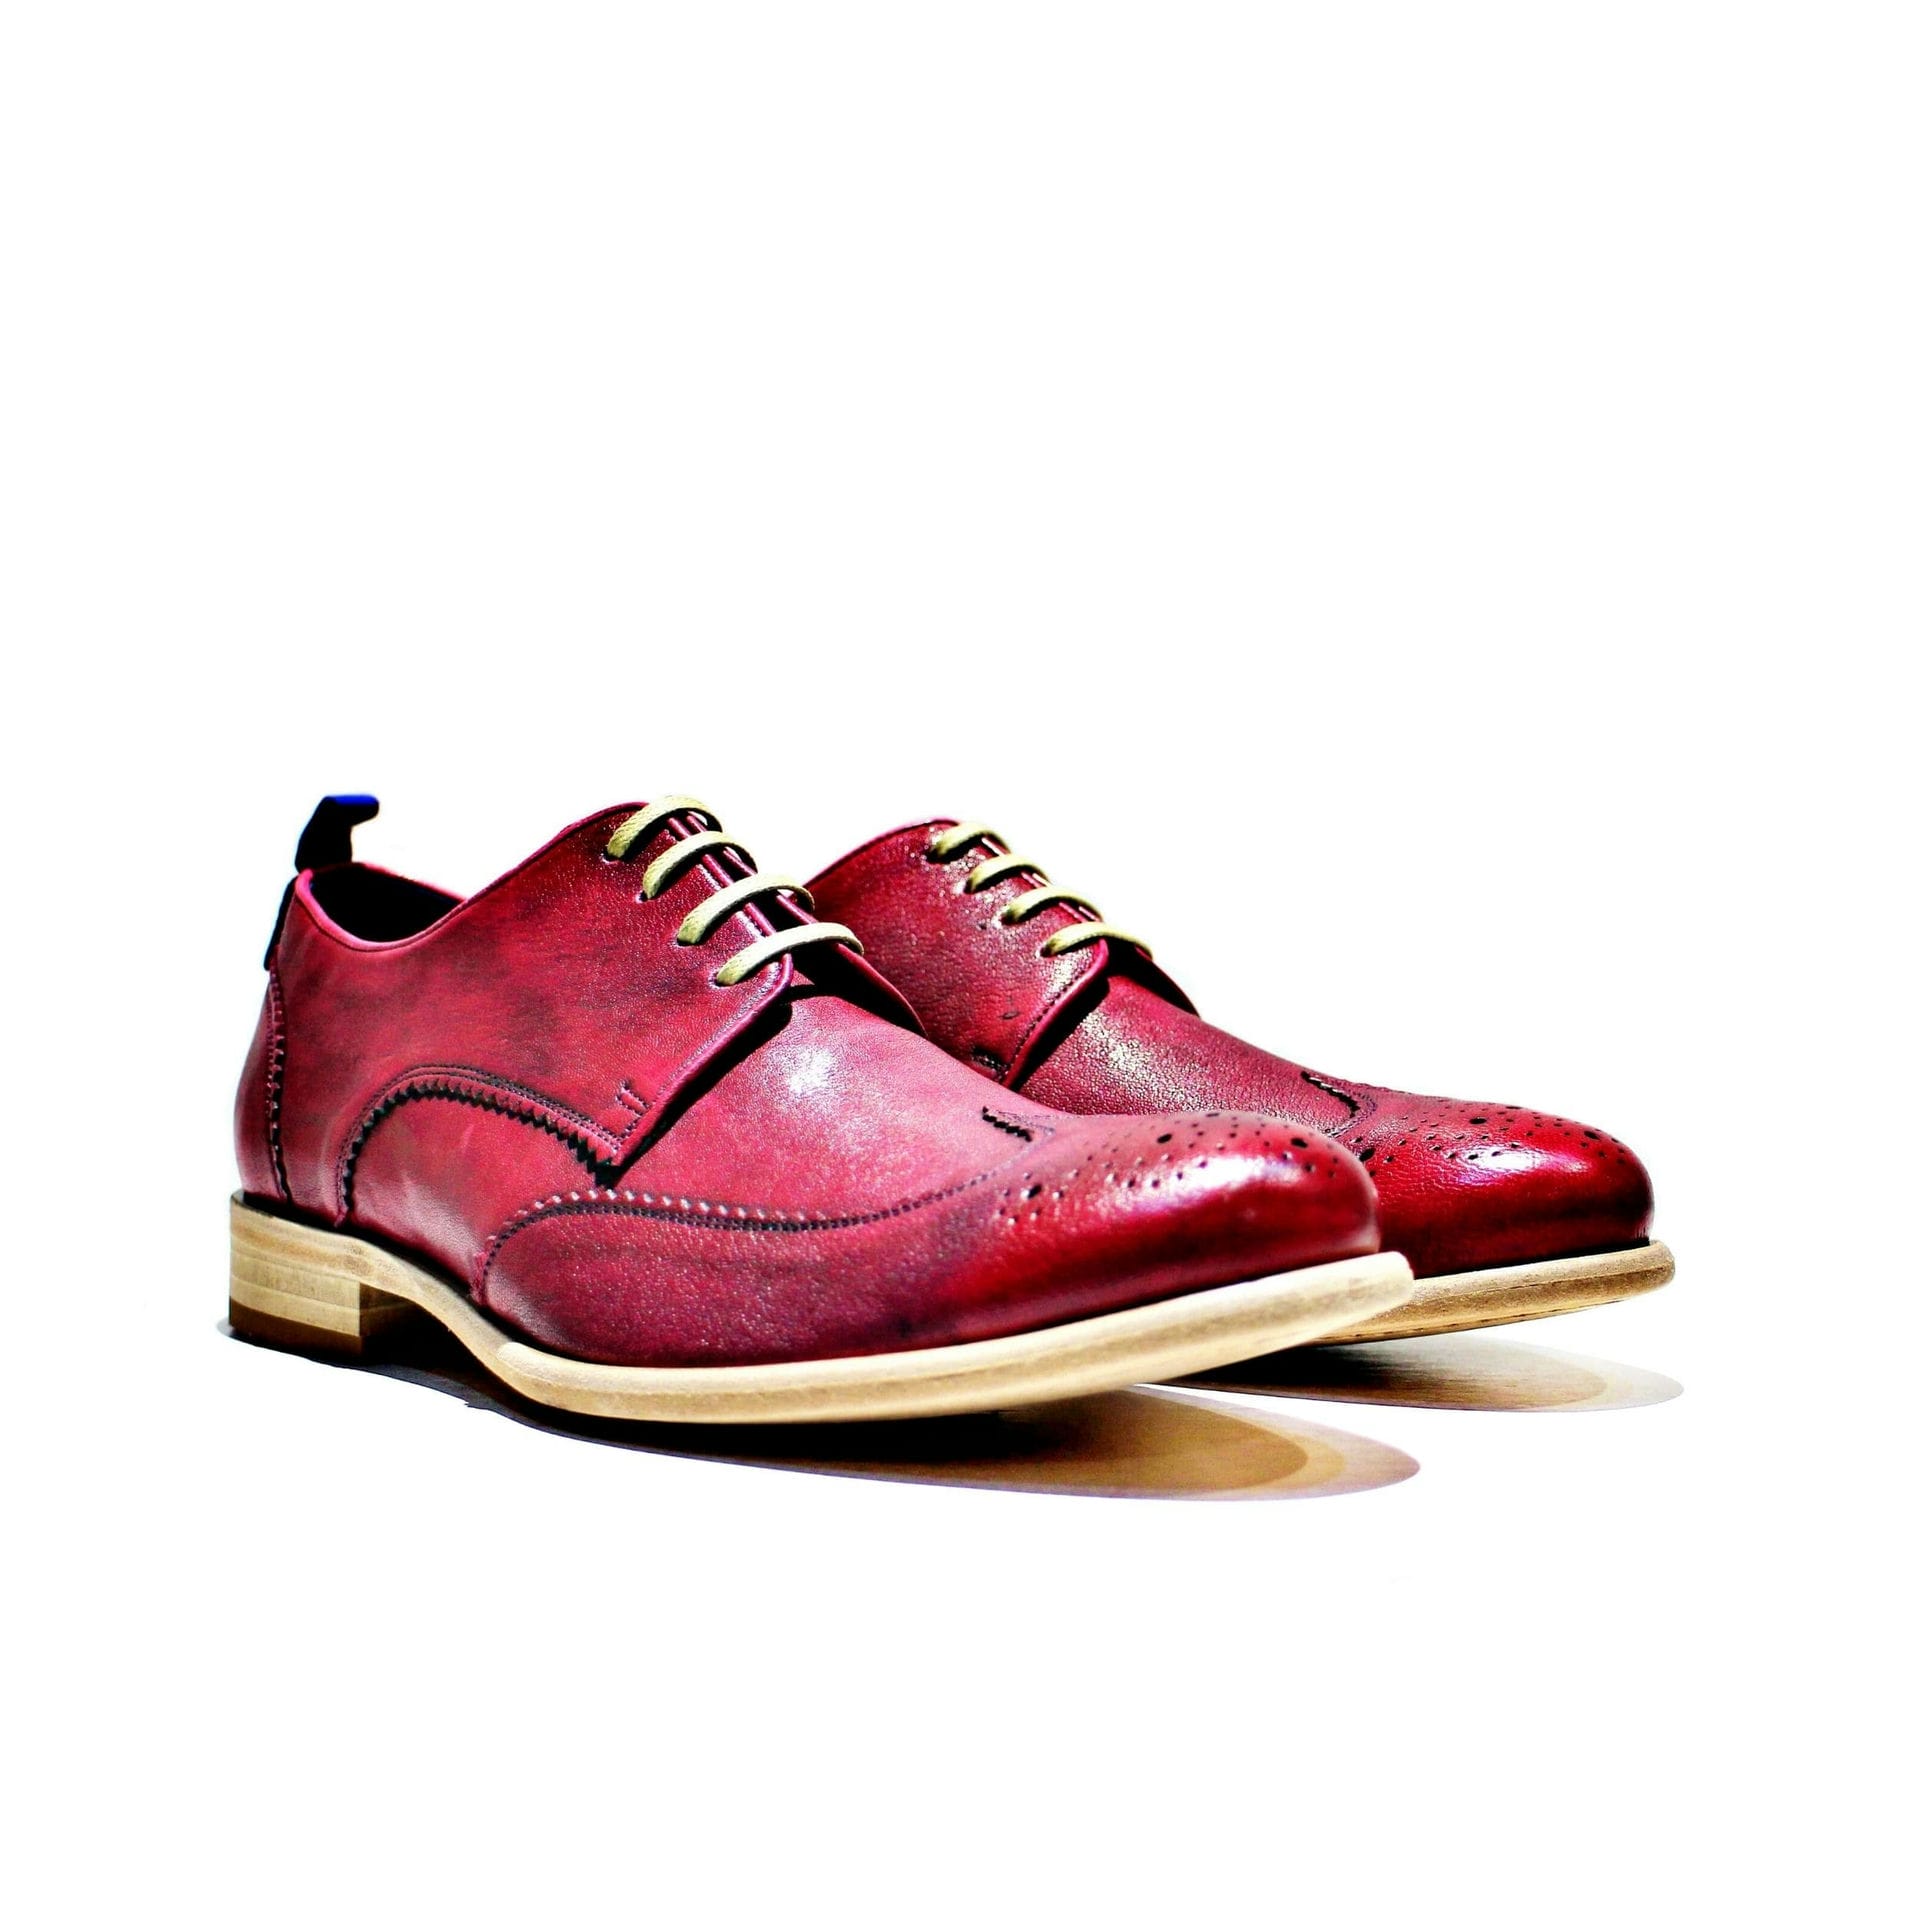 Shoe all composed of leather, with an exclusive look, model Incon. Handmade in Portugal. . “Walk with Pintta”